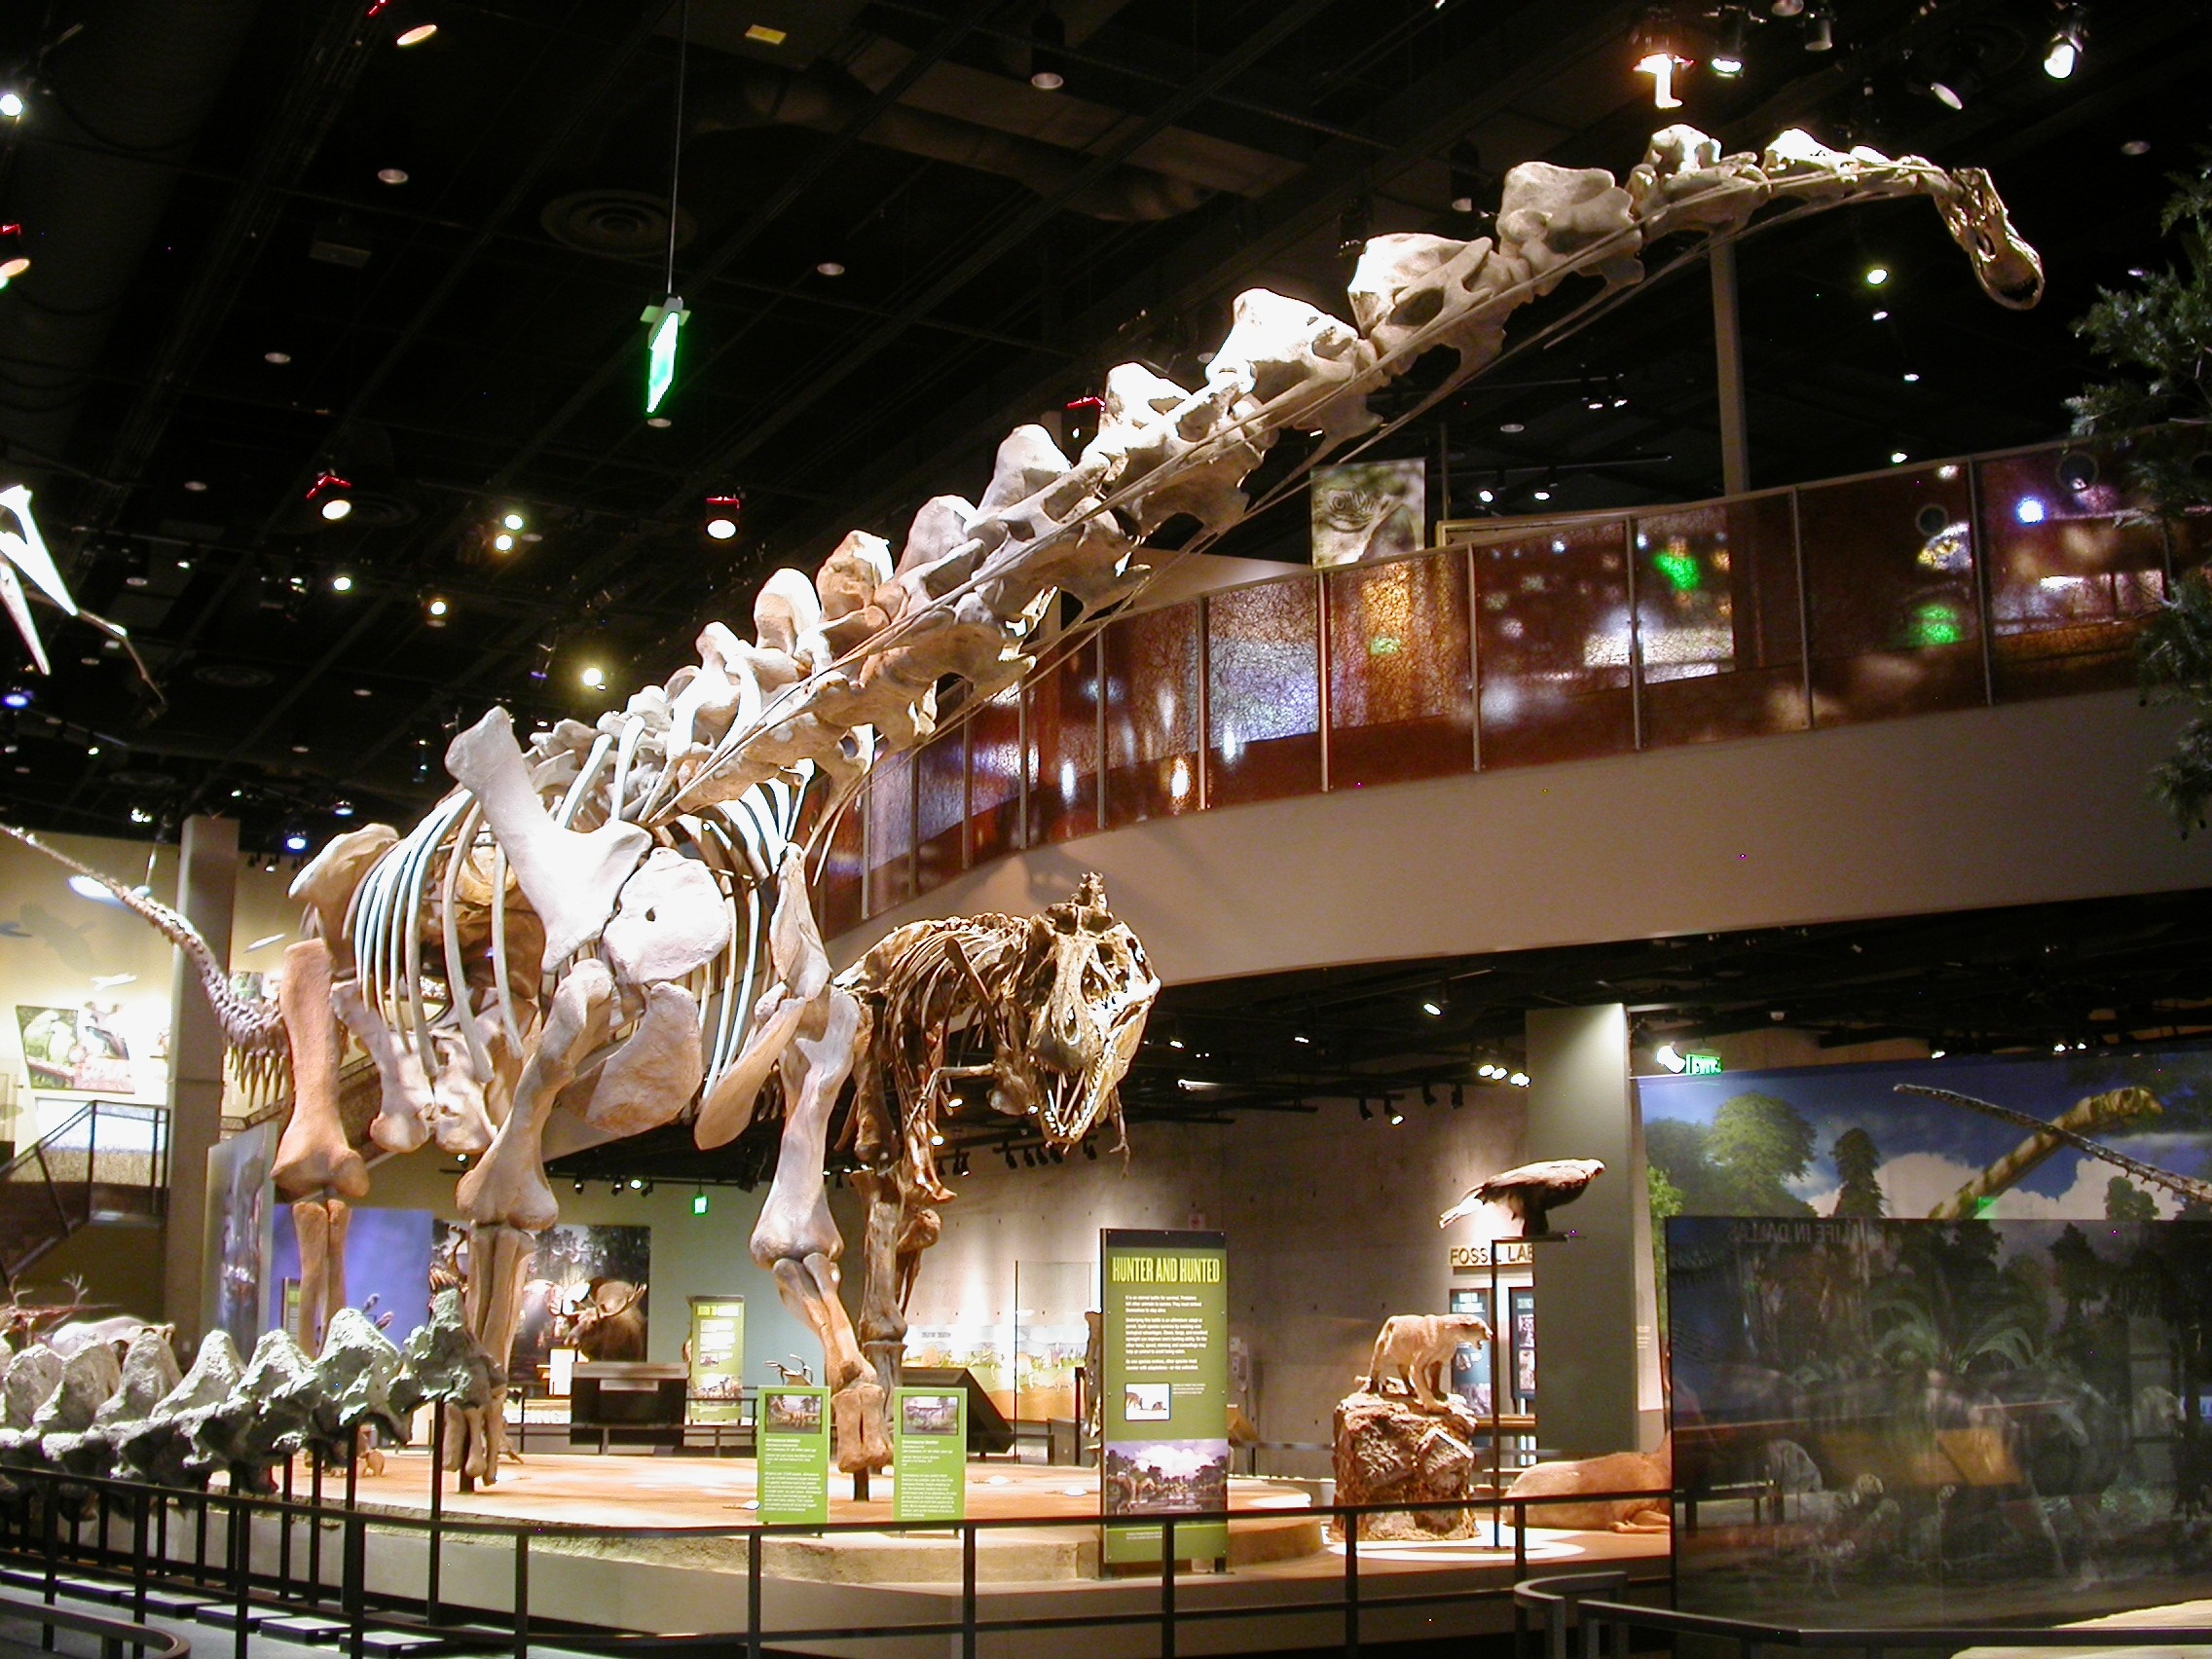 Perot Museum of Nature and Science – A Museum For All Ages